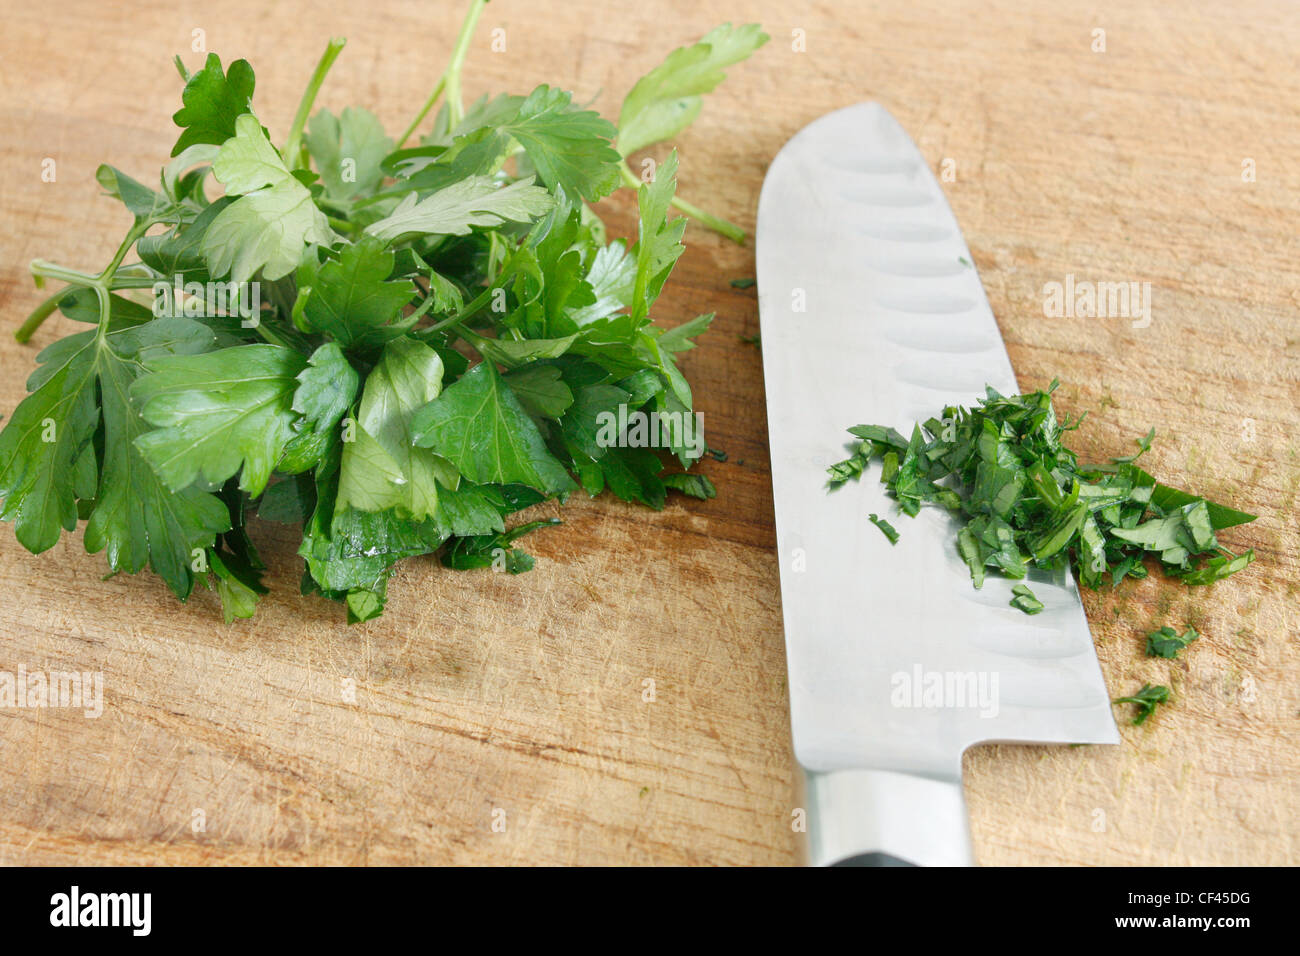 Chopping parsley on a wooden surface Stock Photo